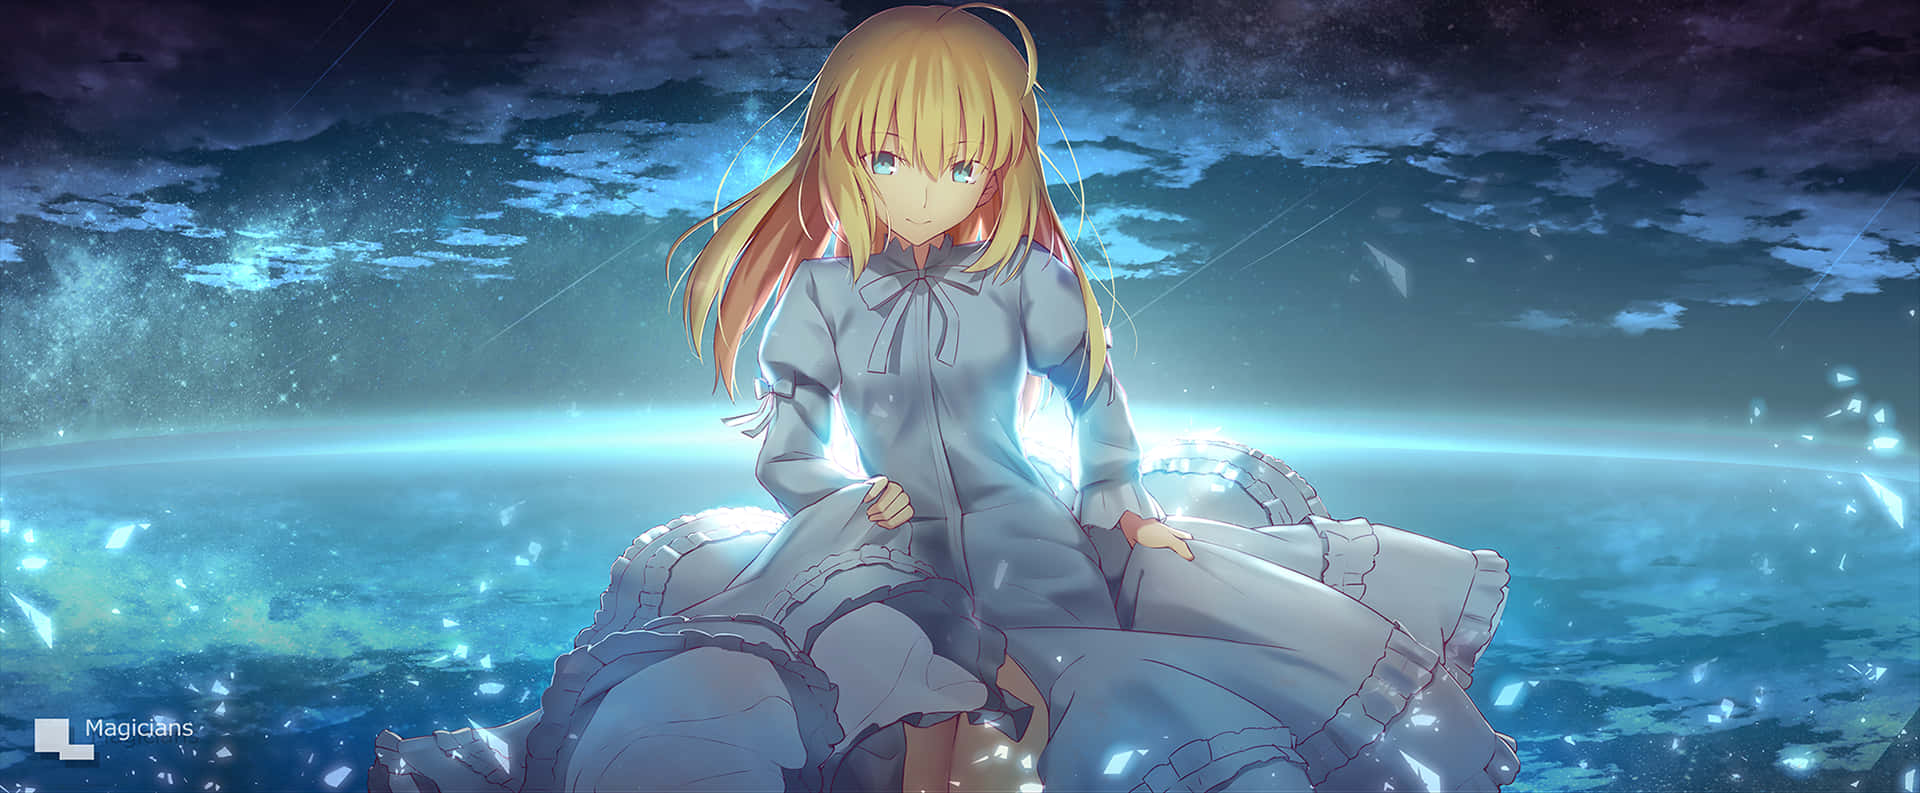 Saber Fate Stay Night In White Gown Wallpaper